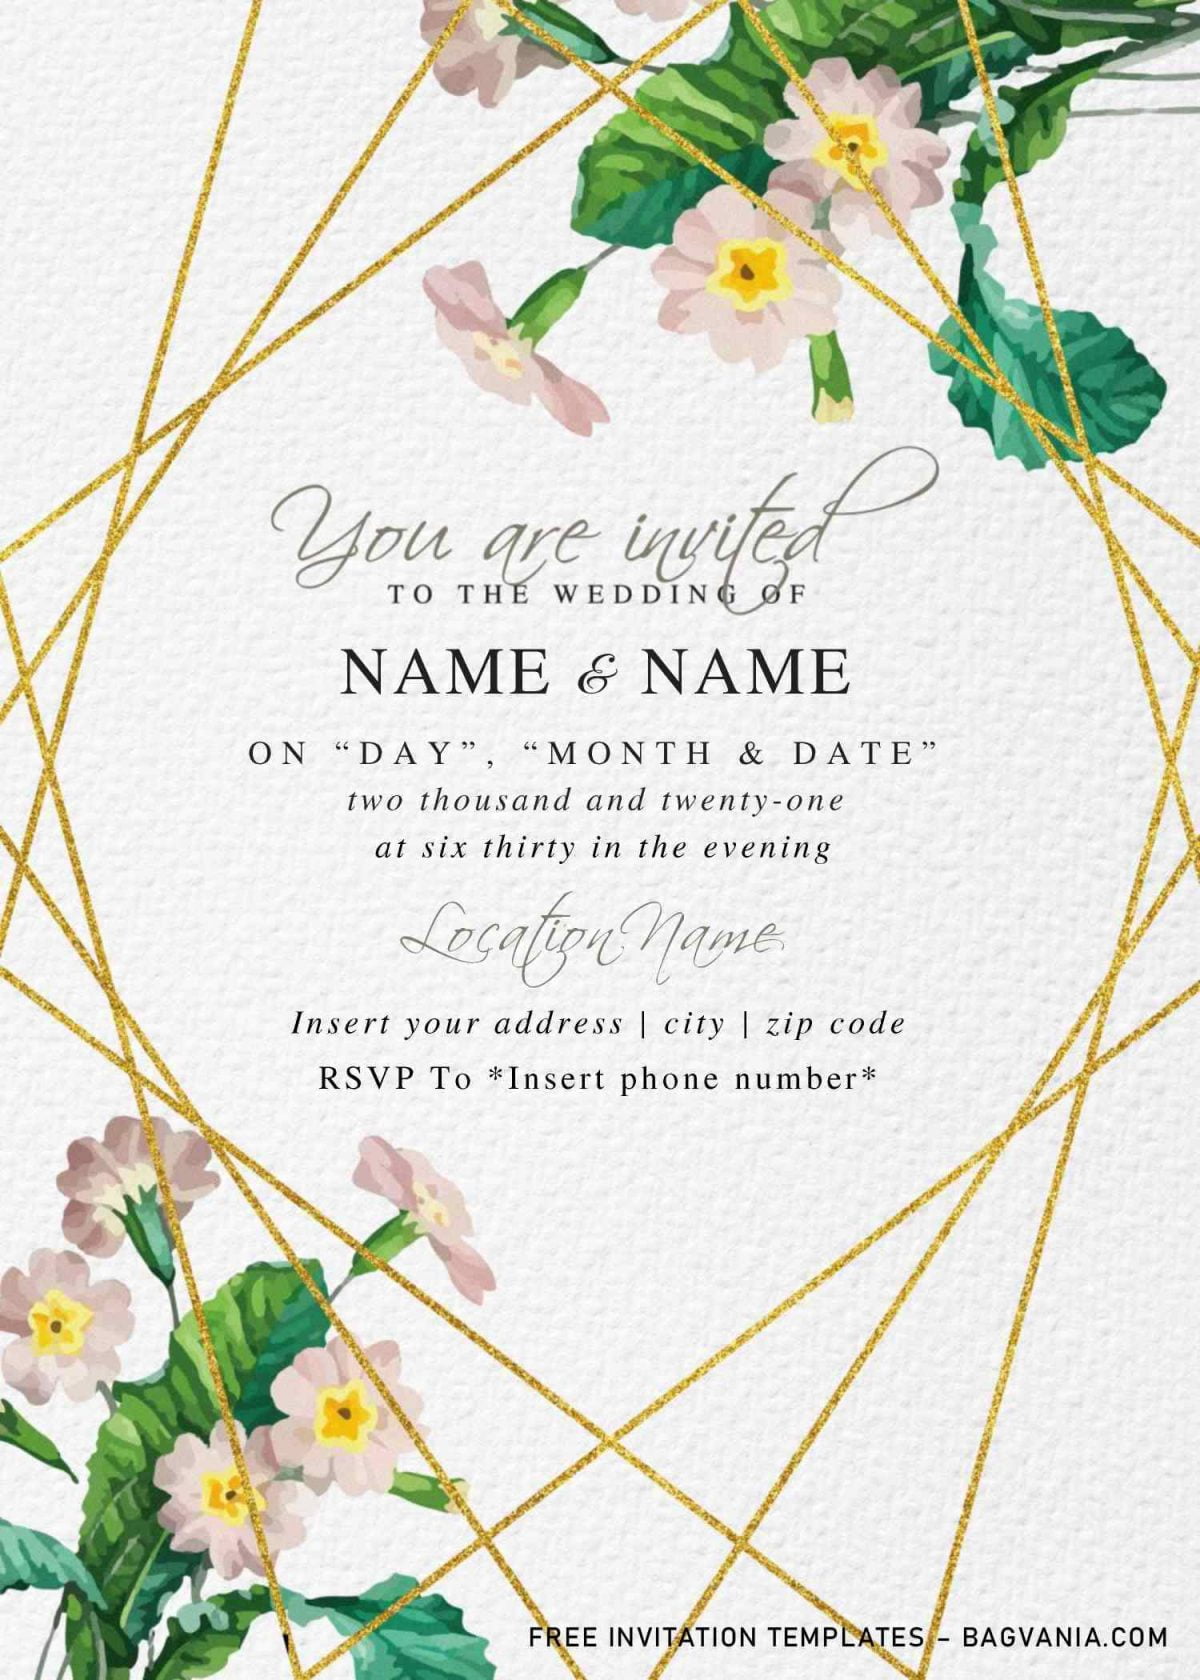 Free Botanical Floral Wedding Invitation Templates For Word | FREE